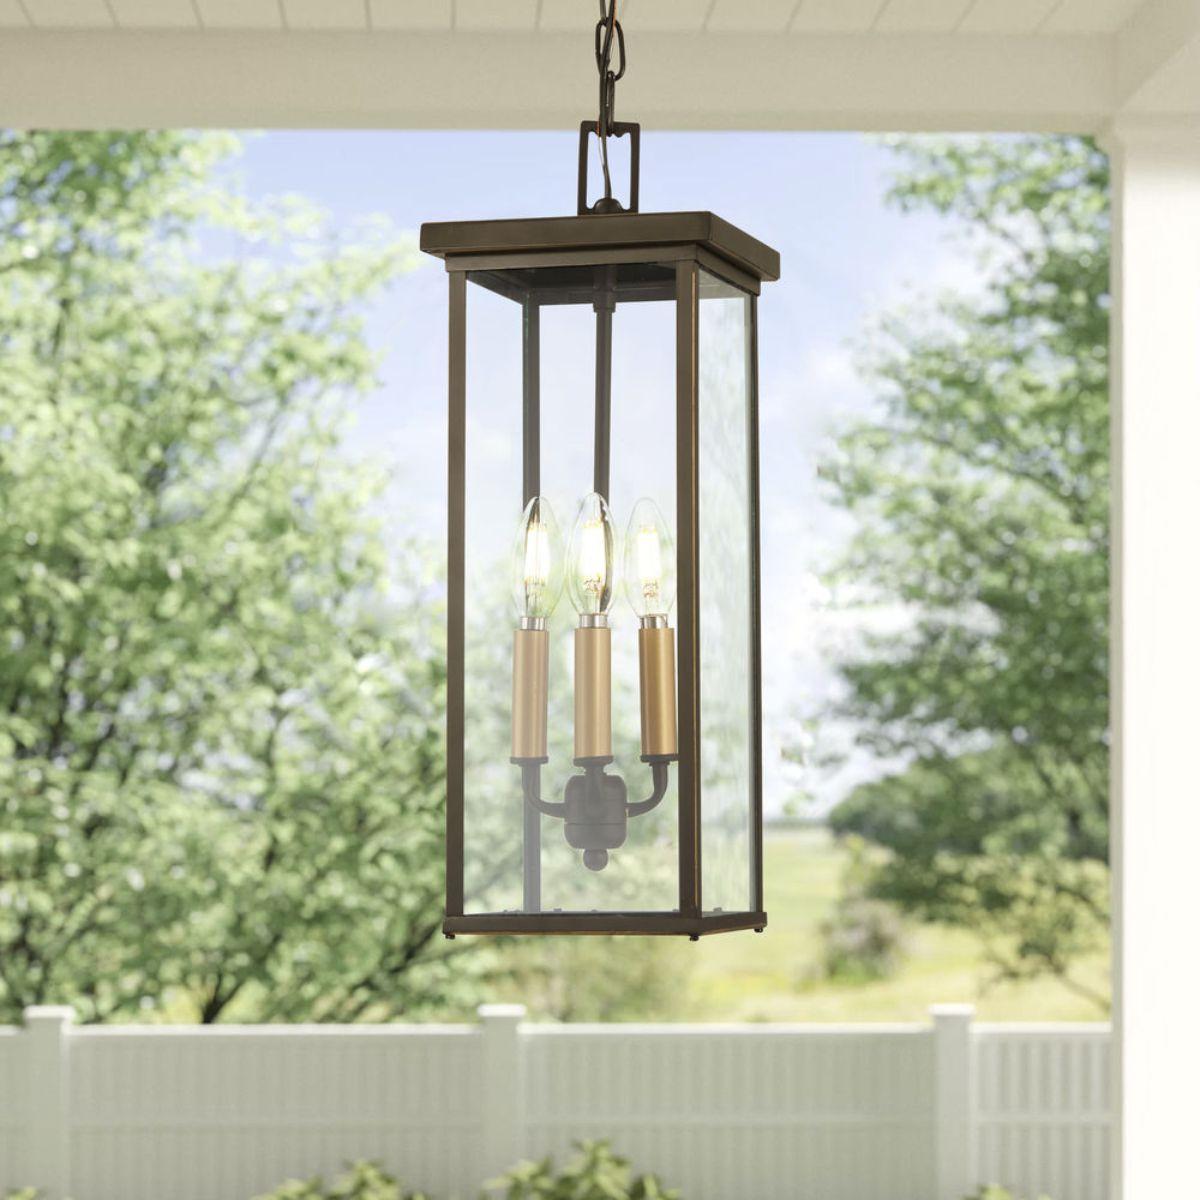 Casway 4 lights 7 in. Outdoor Hanging Lantern Oil Rubbed Bronze & Gold finish